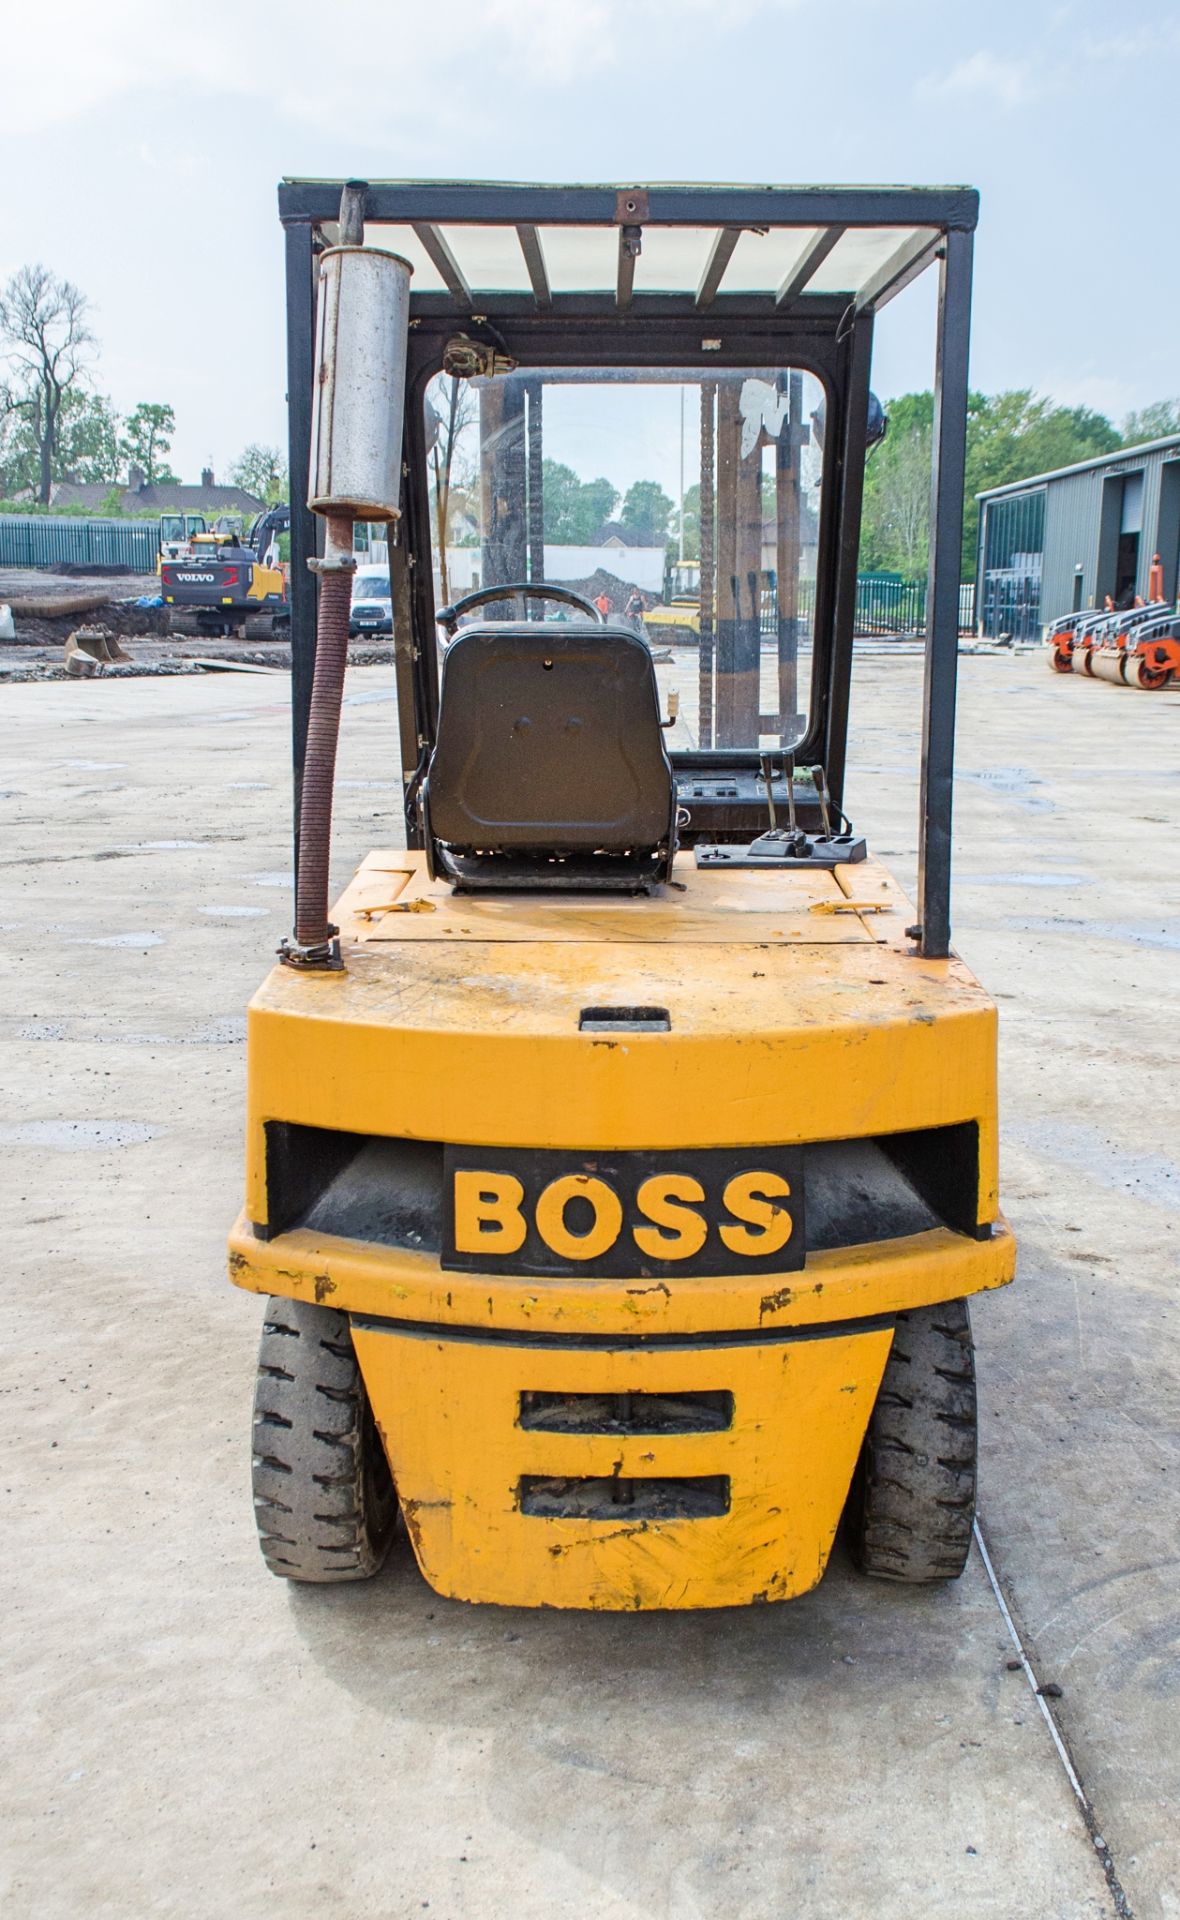 Boss RH30D 3 tonne diesel driven fork lift truck Year: Not stated on plate S/N: 01329 Recorded - Image 6 of 15